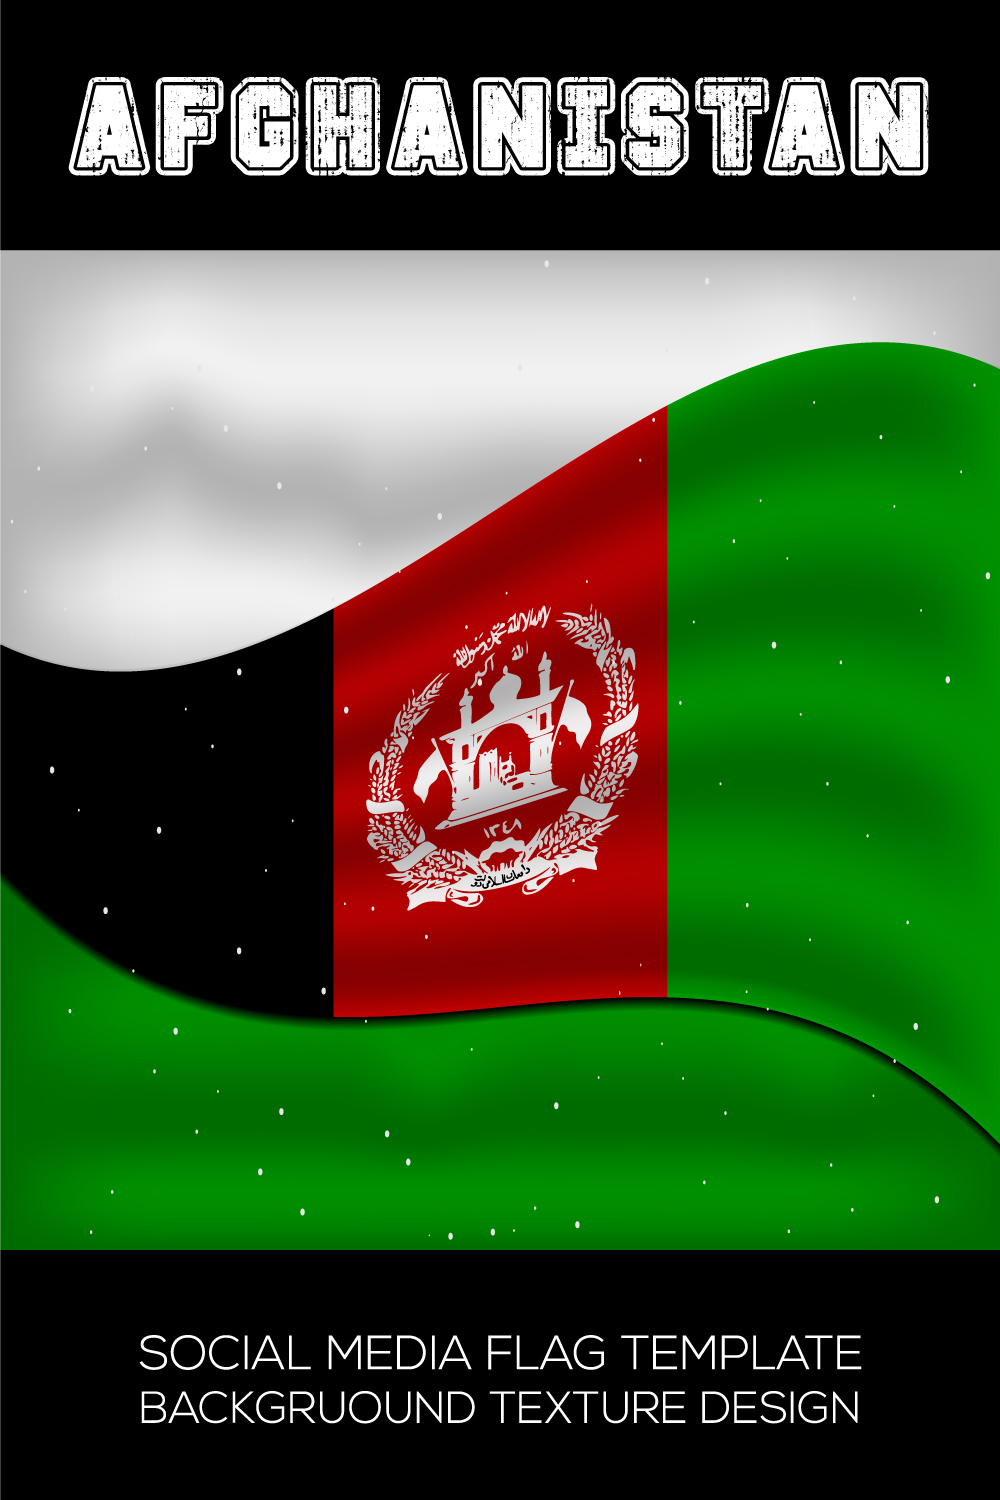 Exquisite image of the flag of afghanistan.